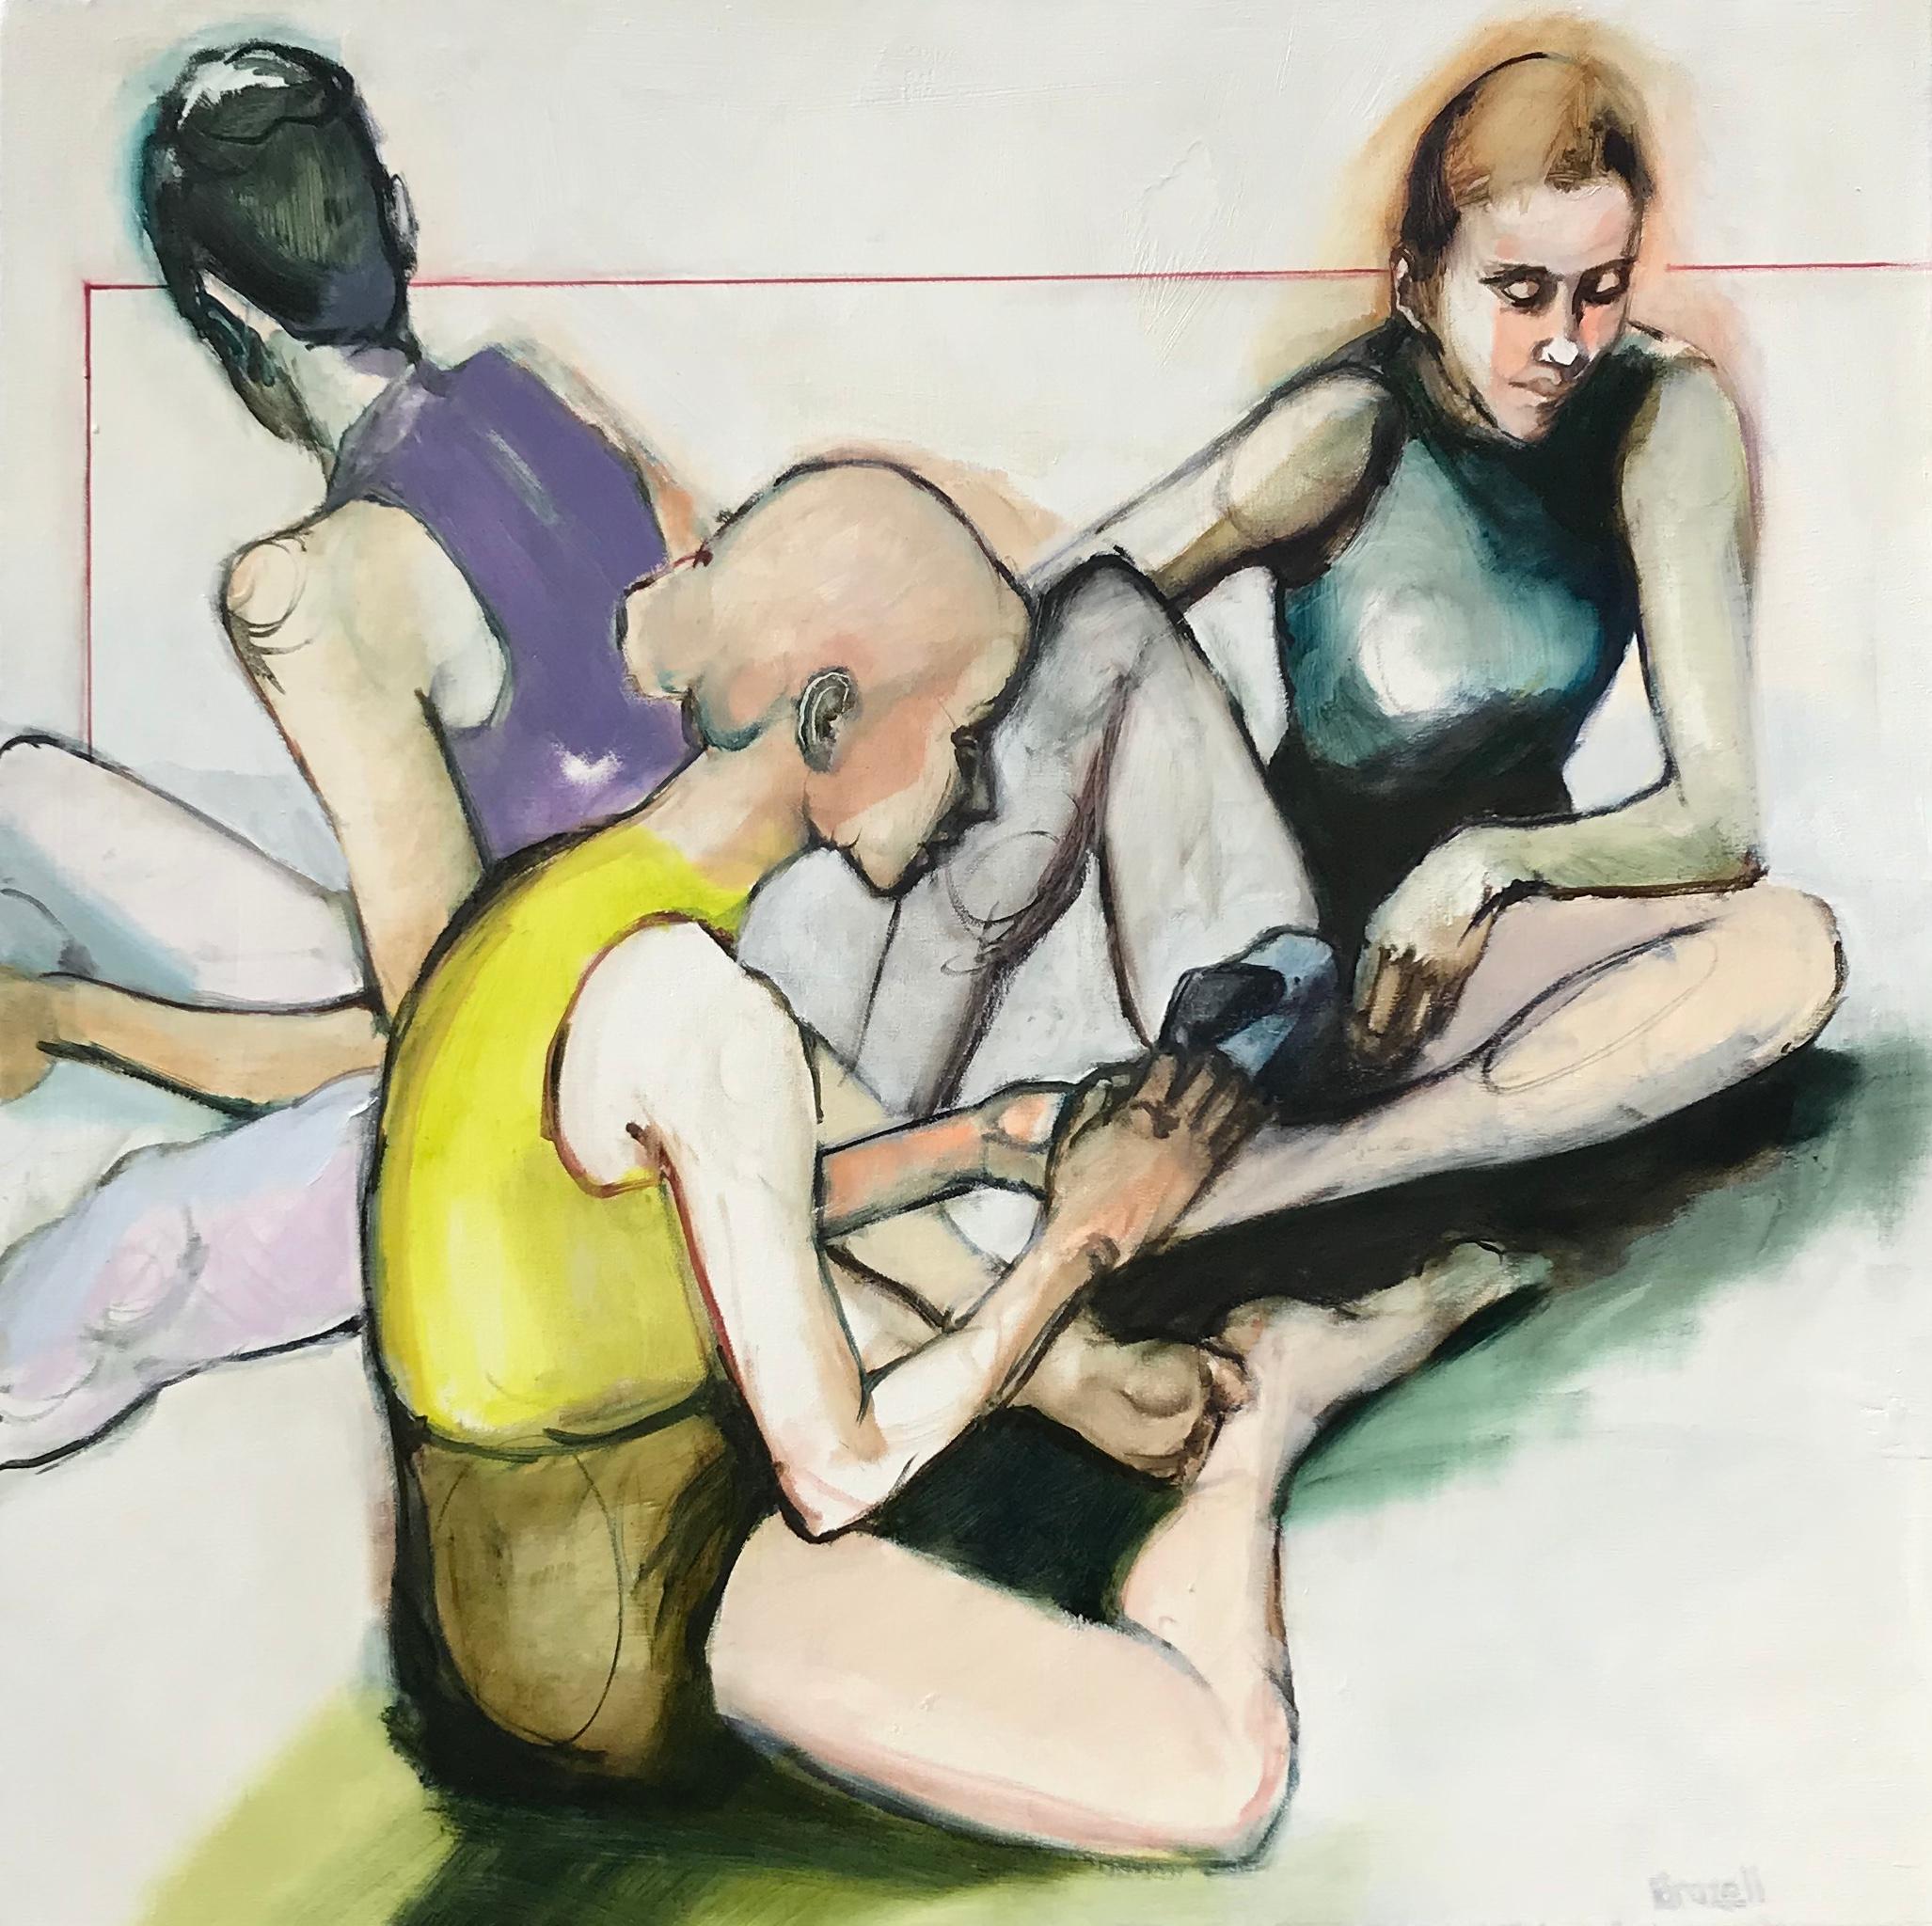 Liz Brozell Figurative Painting - Putting on Pointe Shoes, Oil Painting